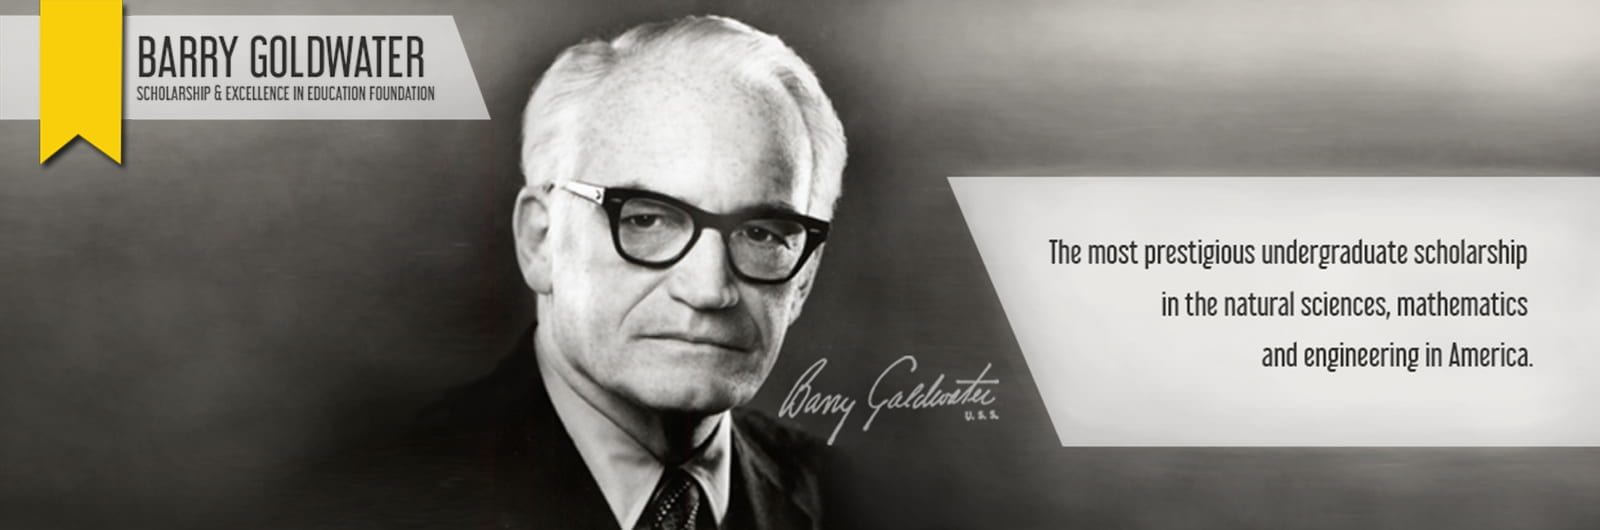 Barry M. Goldwater Scholarship